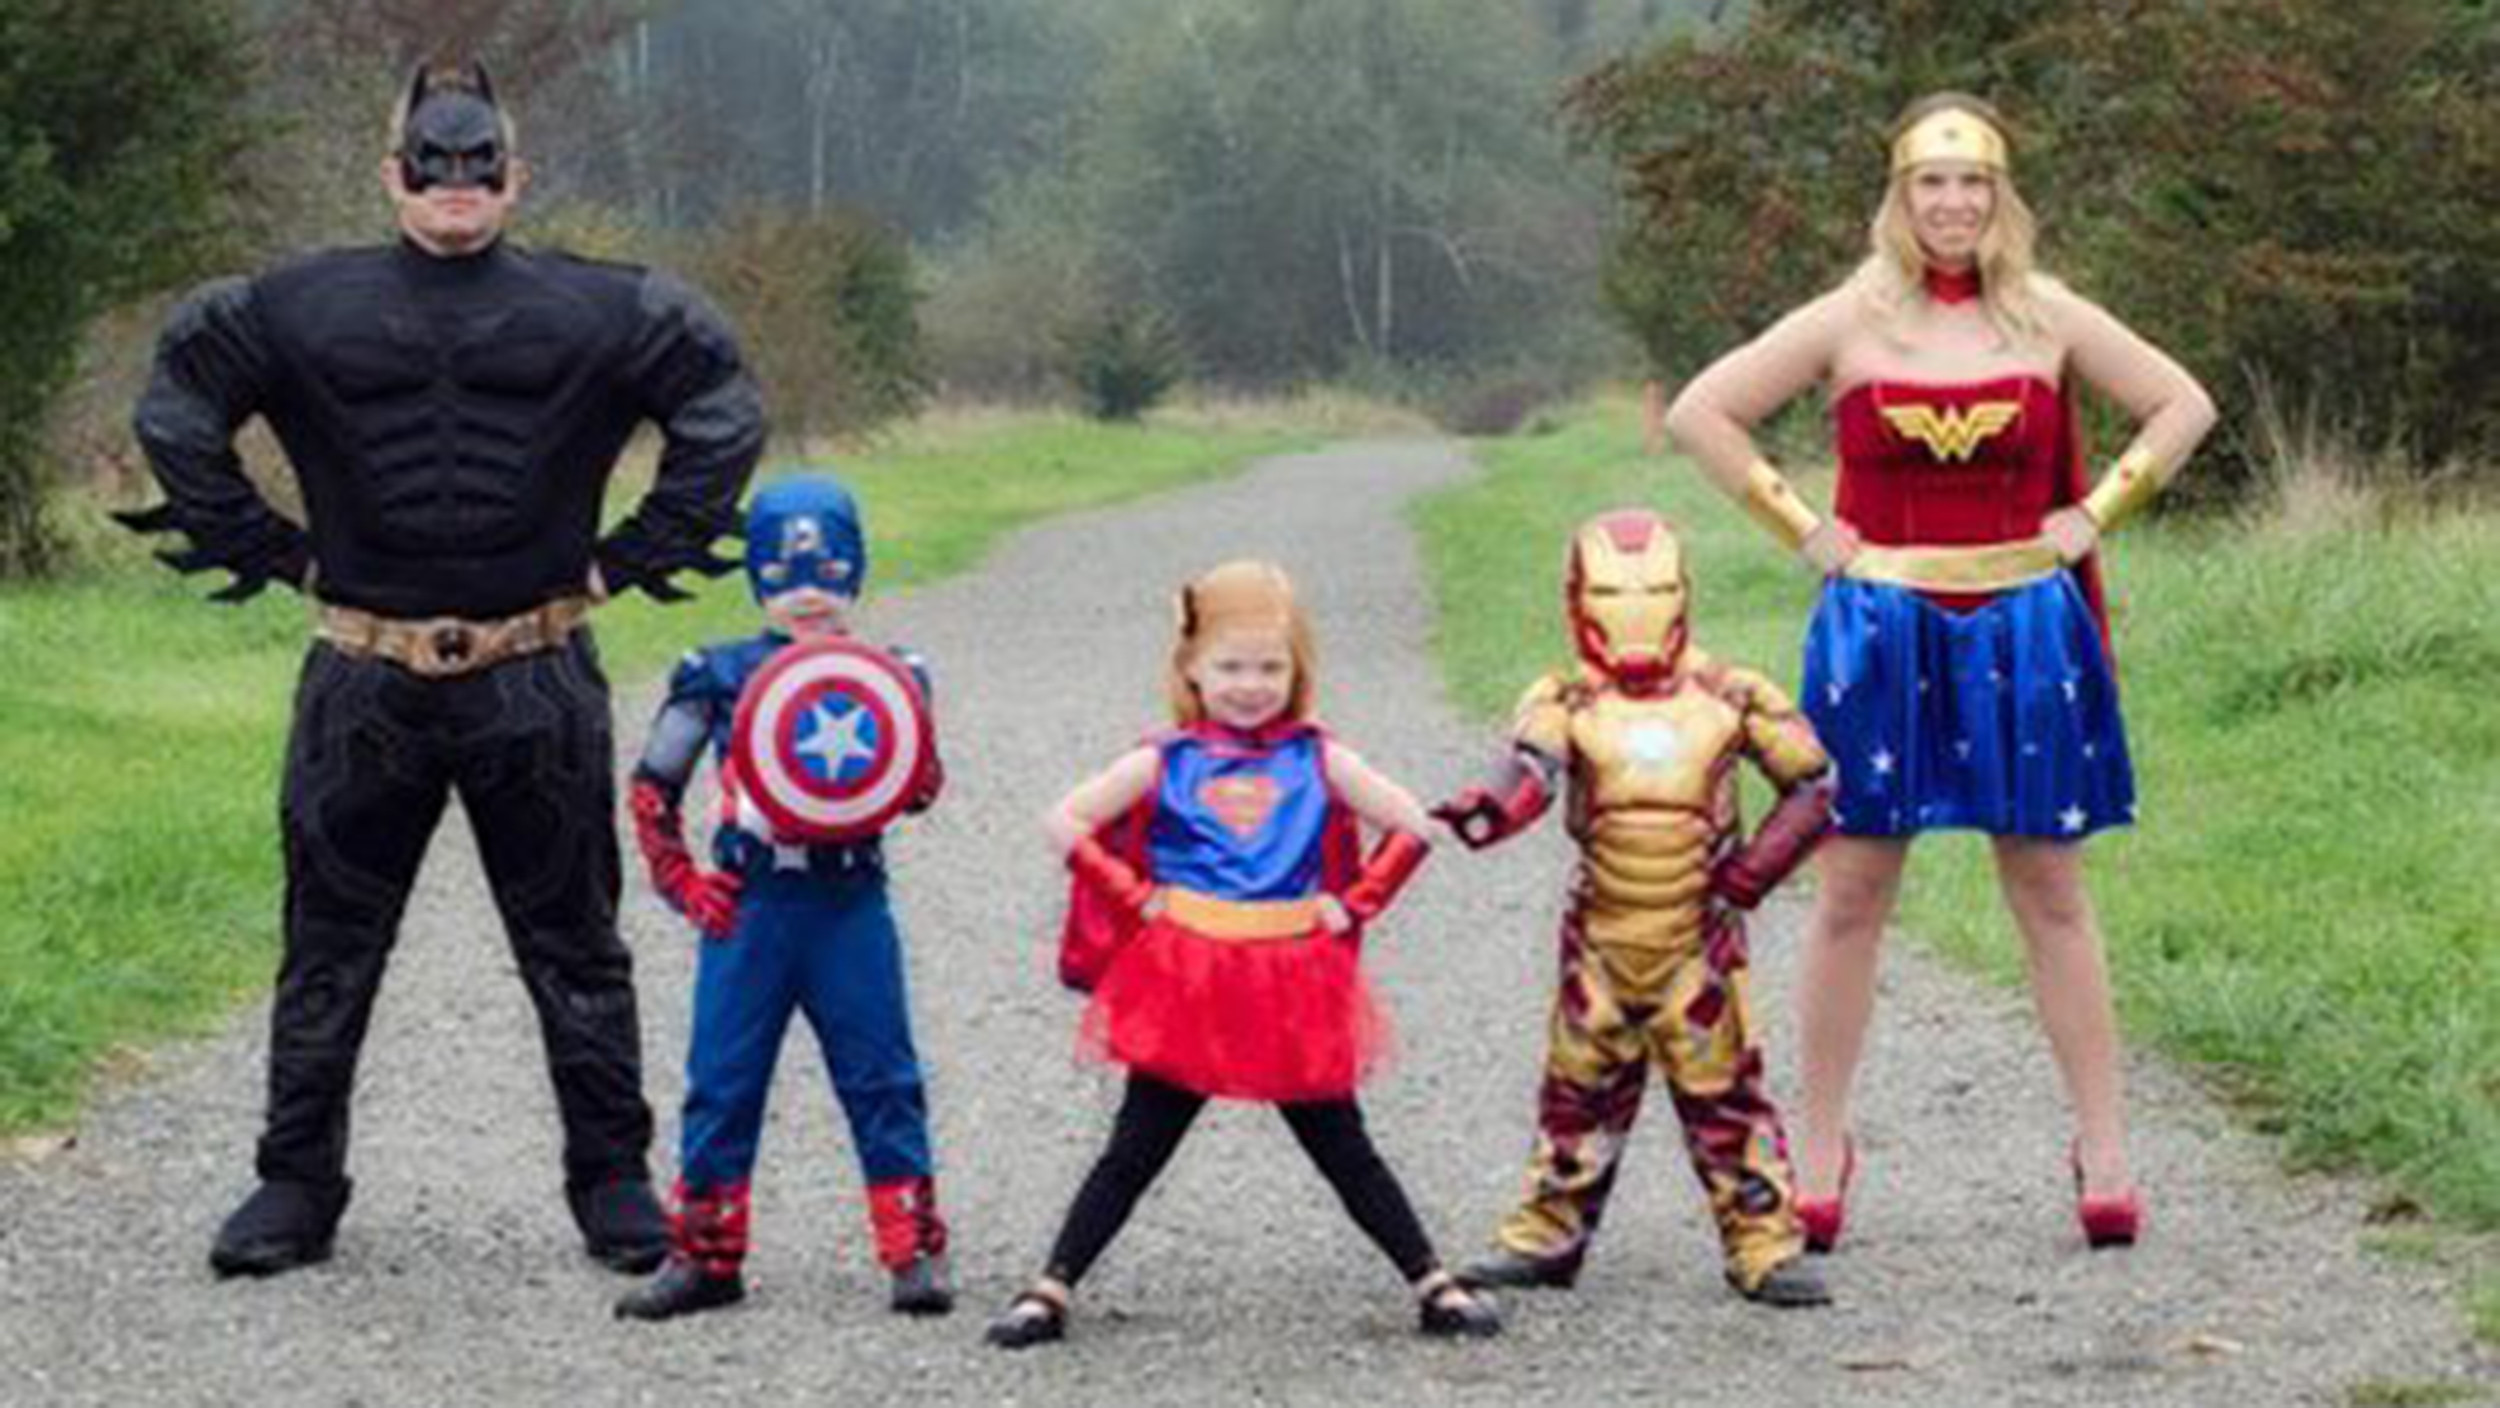 Halloween Costume Theme Ideas
 19 of the cutest family theme costumes for Halloween